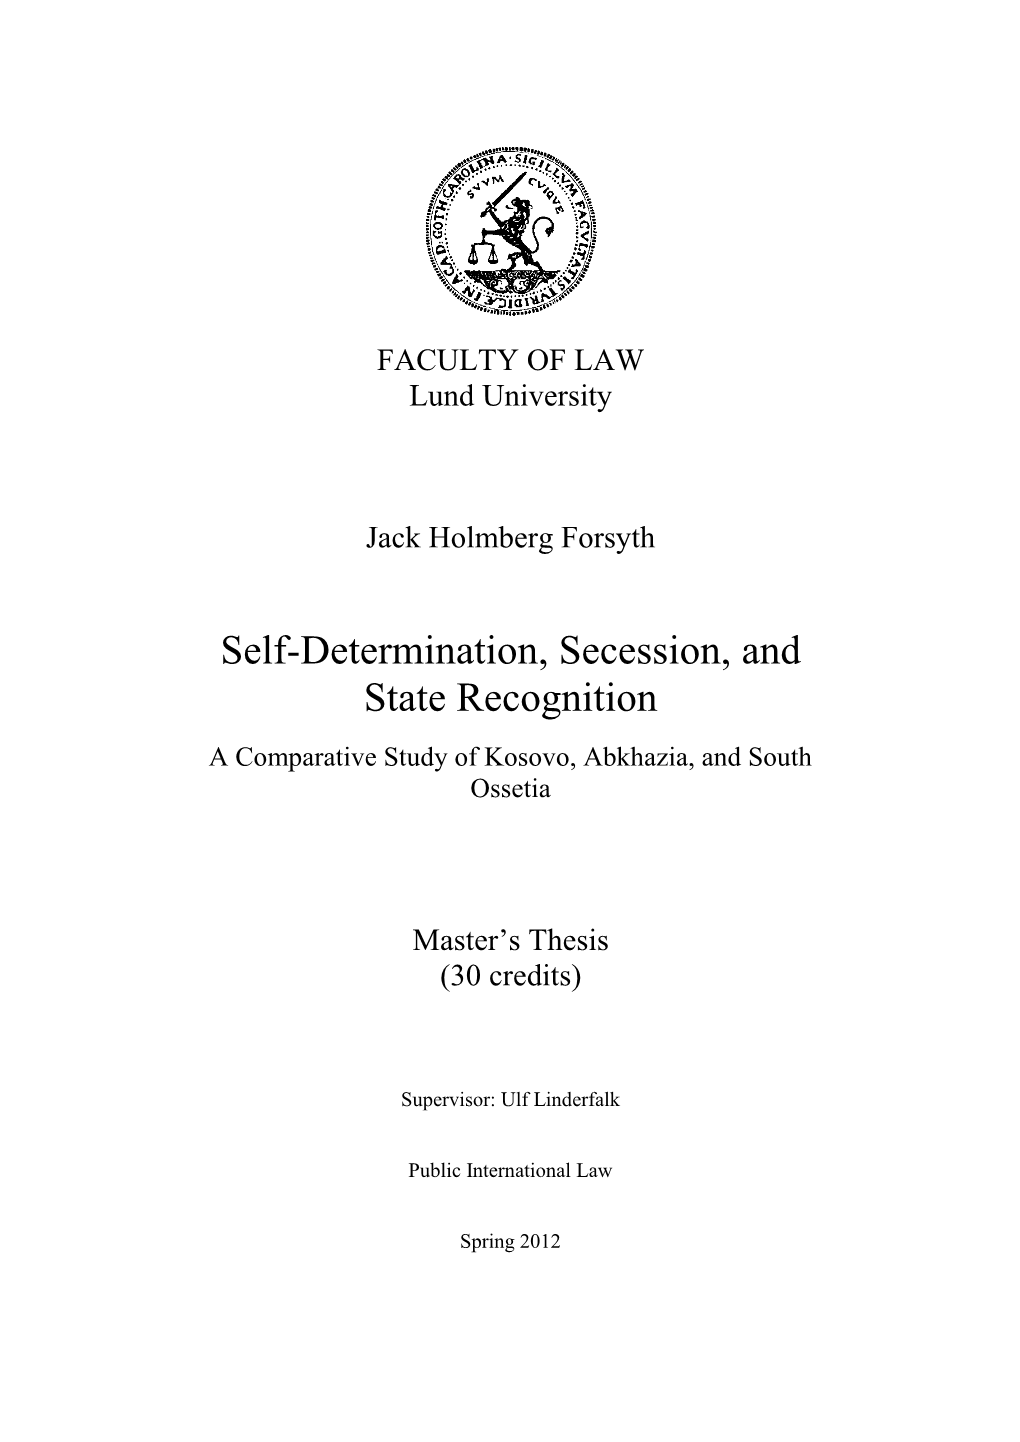 Self-Determination, Secession, and State Recognition a Comparative Study of Kosovo, Abkhazia, and South Ossetia